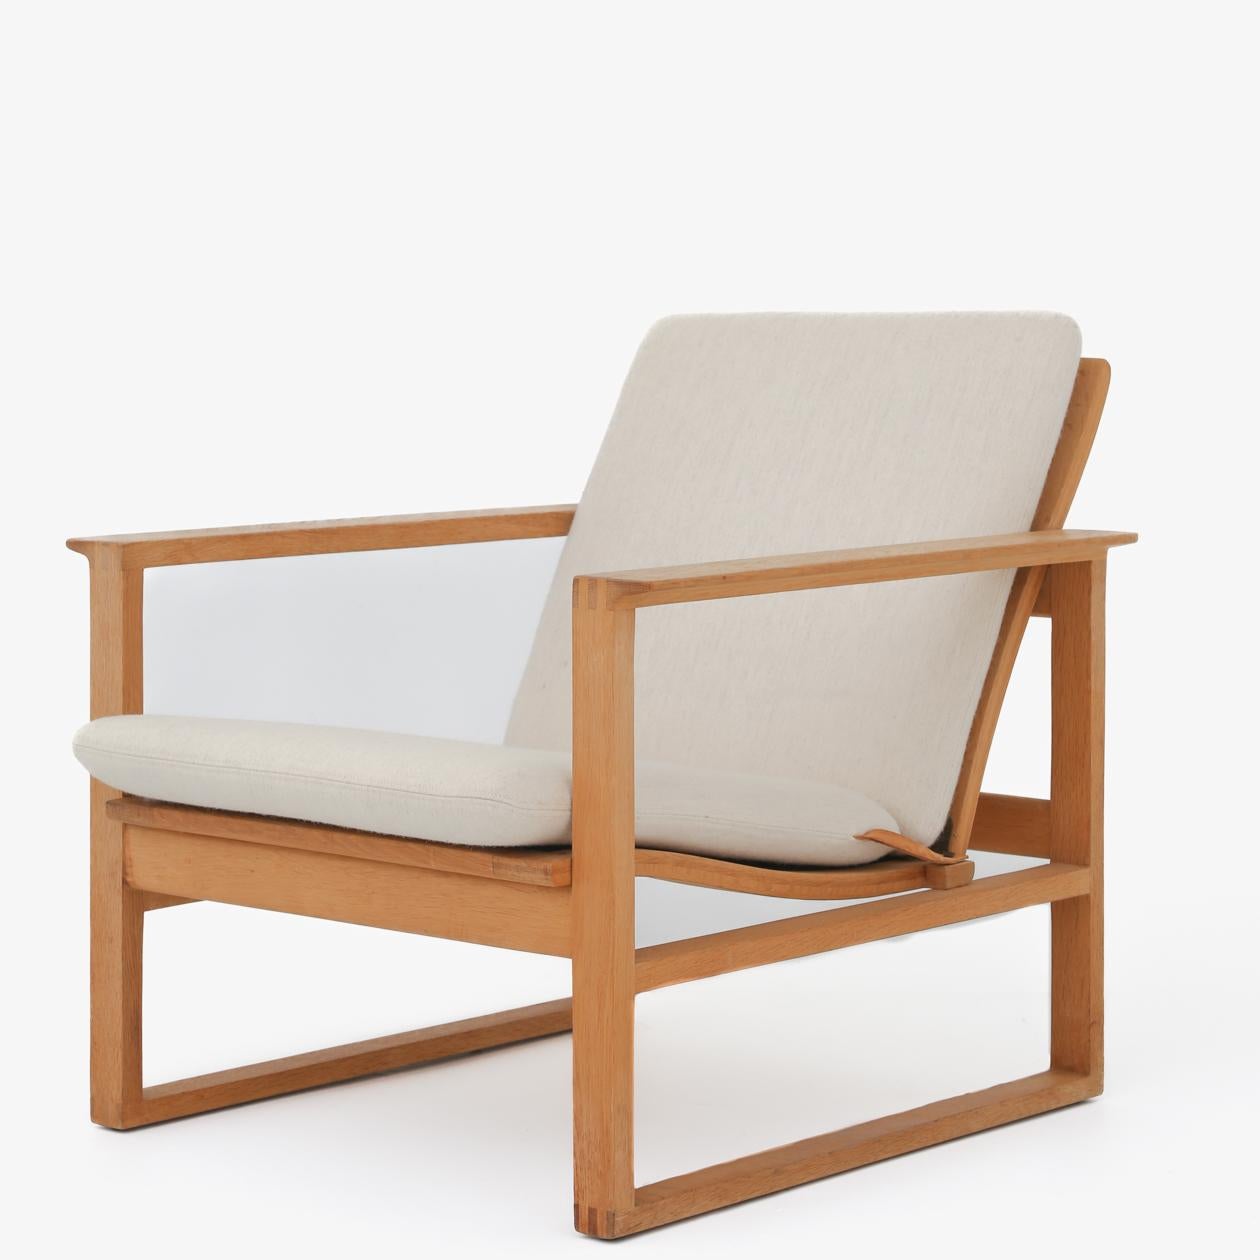 BM 2256 - Low back easy chair in oak with cushions in light wool. Børge Mogensen / Fredericia Furniture.